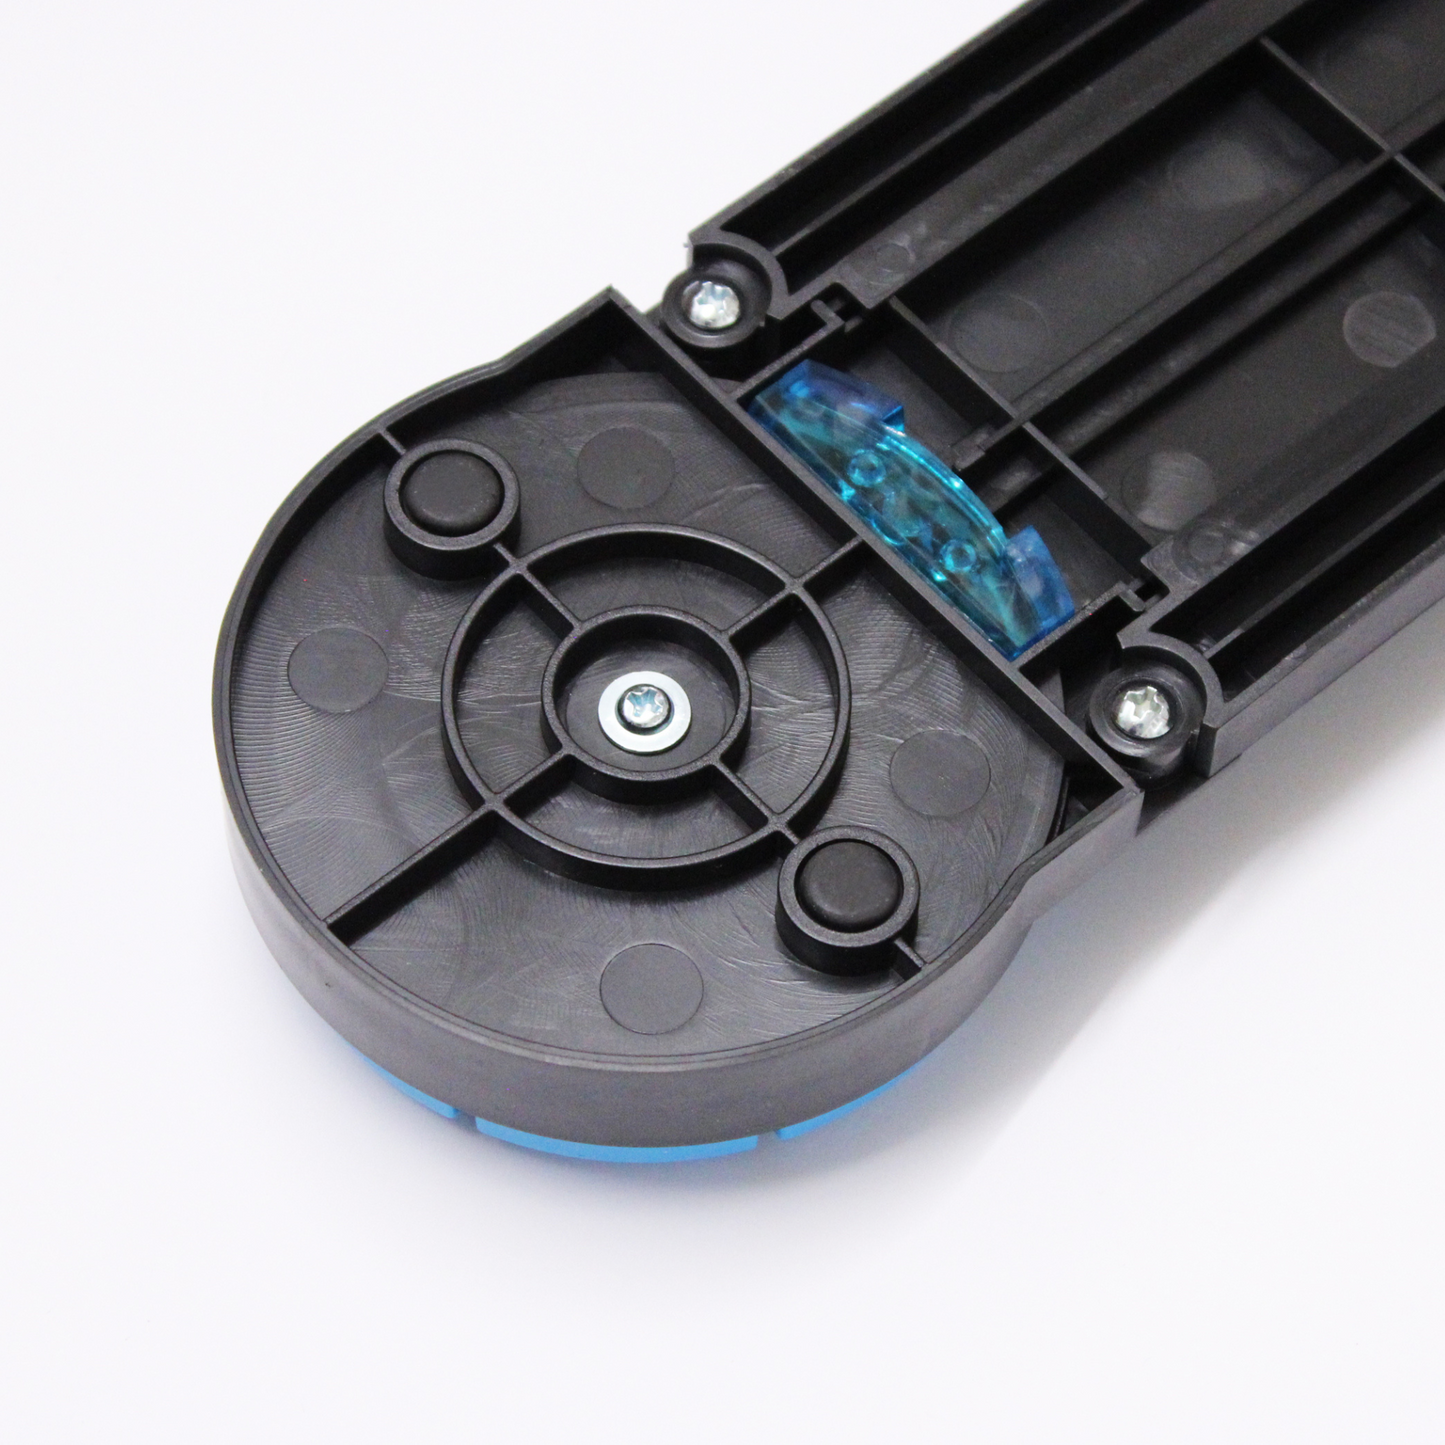 Base of the A4 Dial-A-Blade Creative Trimmer, showing the non slip feet for stability, as well as the sturdy construction of the trimmer.